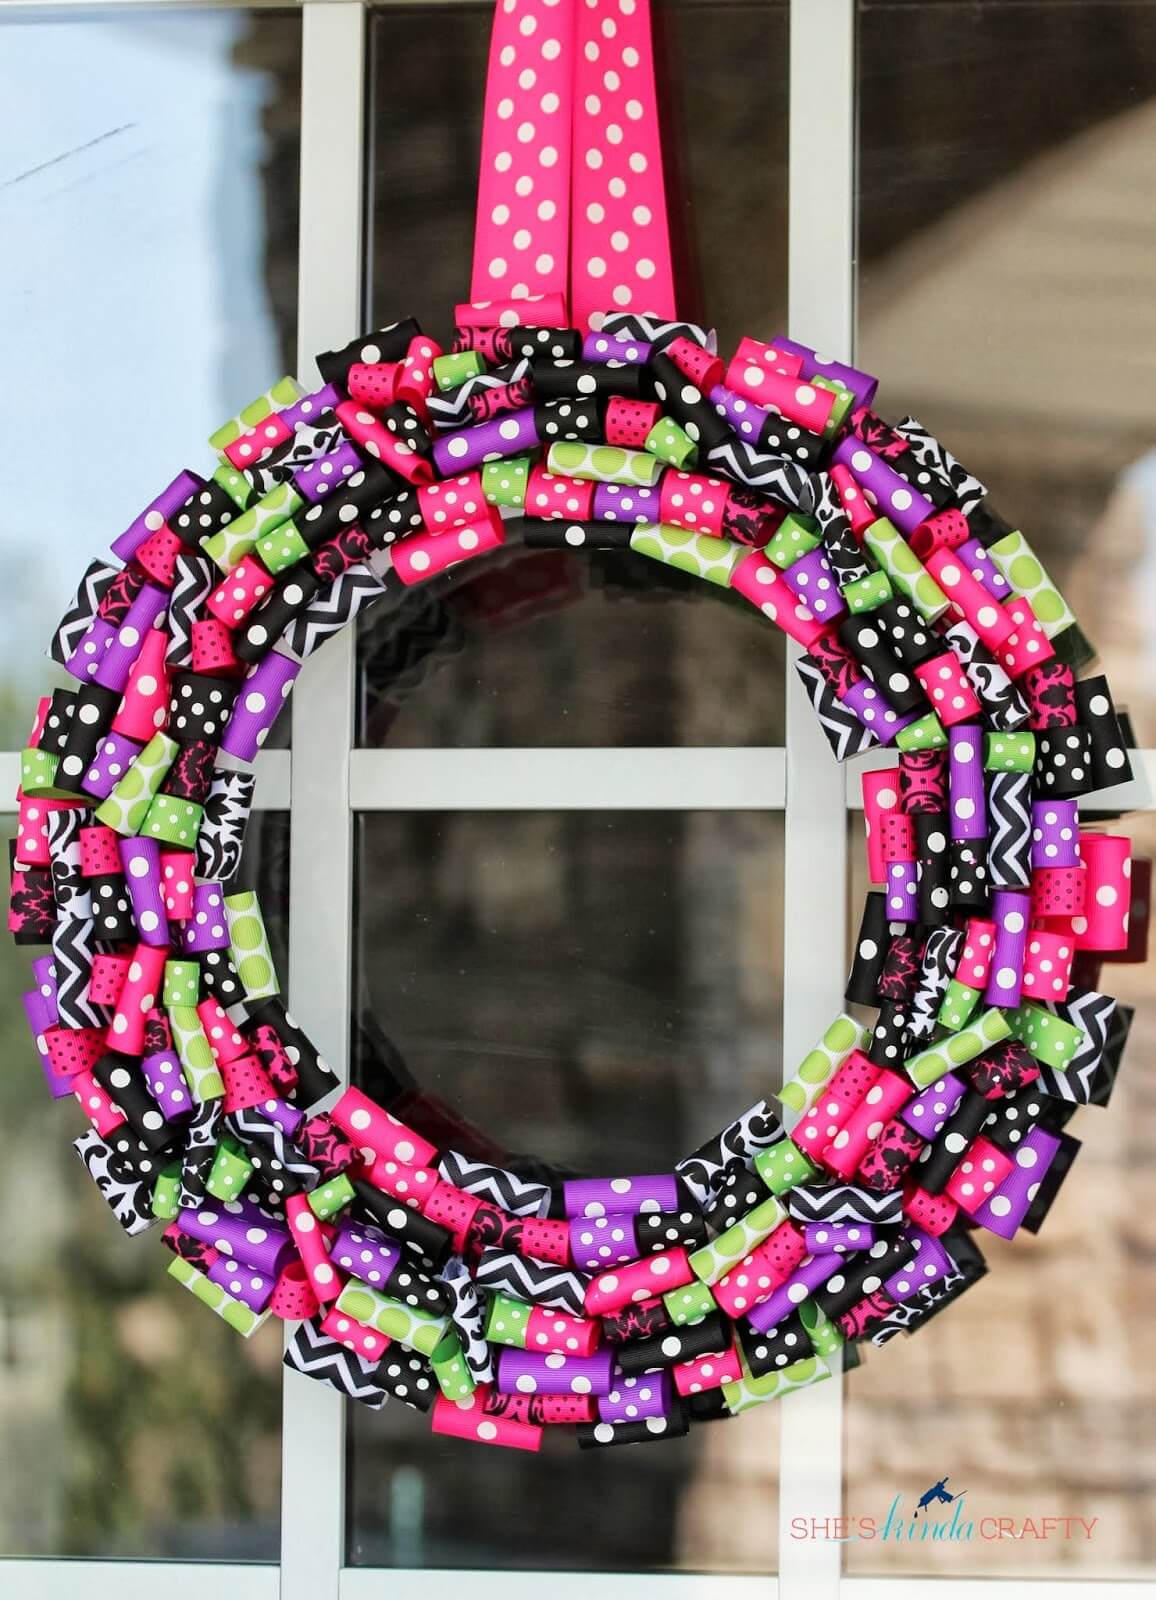 Candyland Inspired Bright Ribbon Wreath